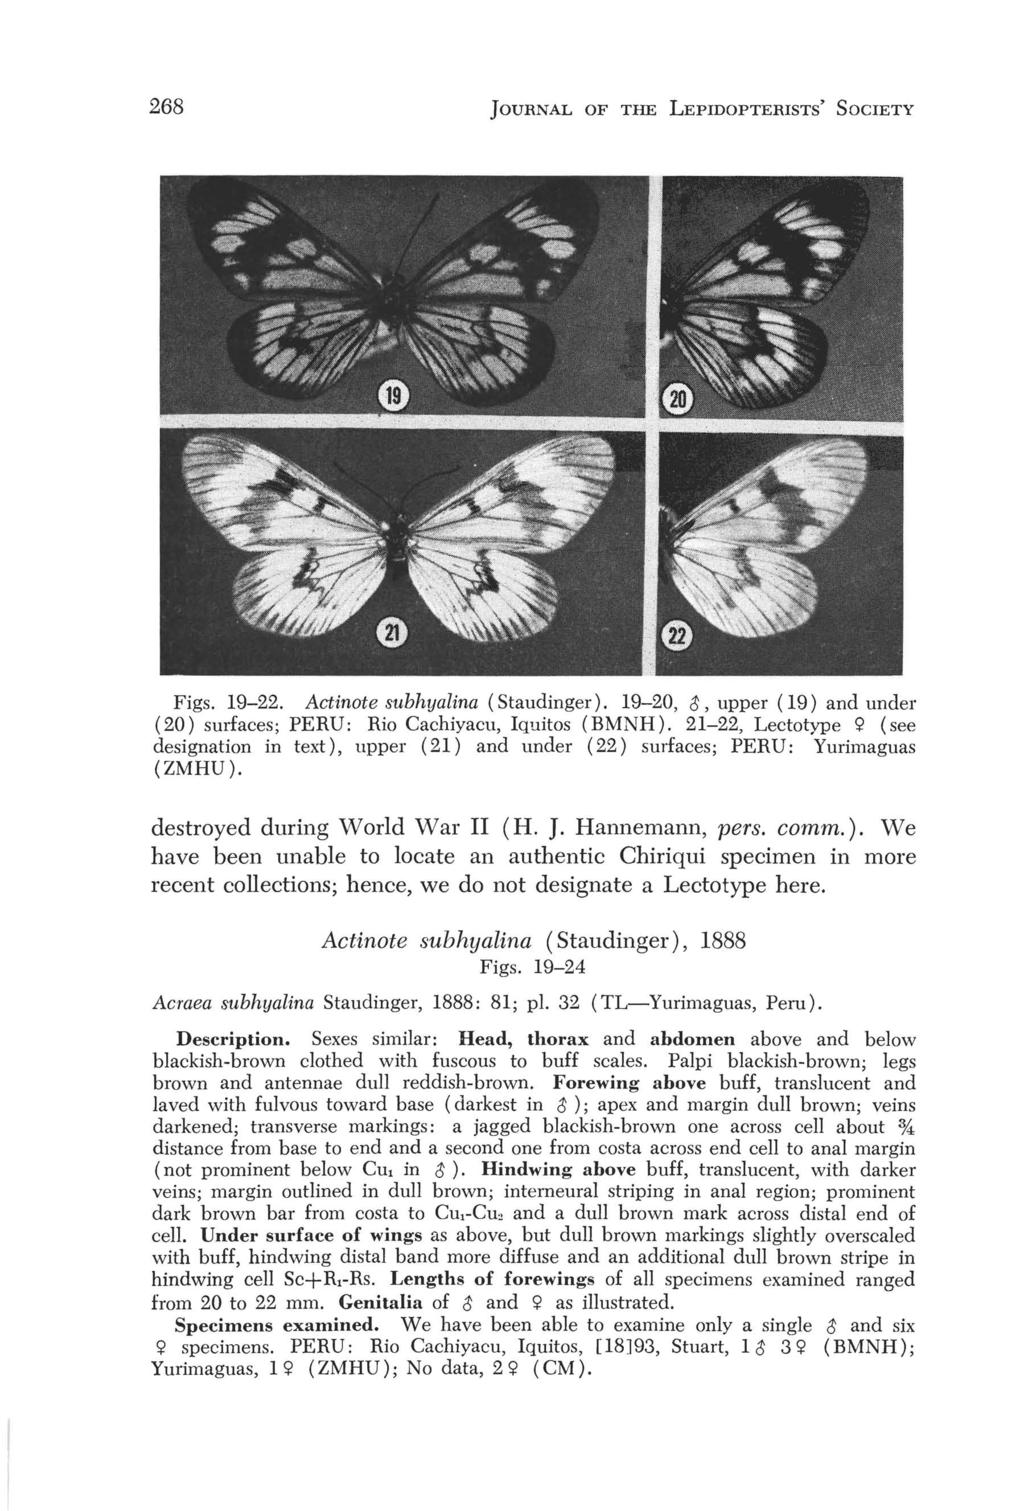 268 JOURNAL OF THE LEPIDOPTERISTS' SOCIETY Figs. 19-22. Actinote stlbhyalina (Staudinger). 19-20, ~, upper (19) and under (20) surfaces; PERU: Rio Cachiyacu, Iquitos (BMNH).